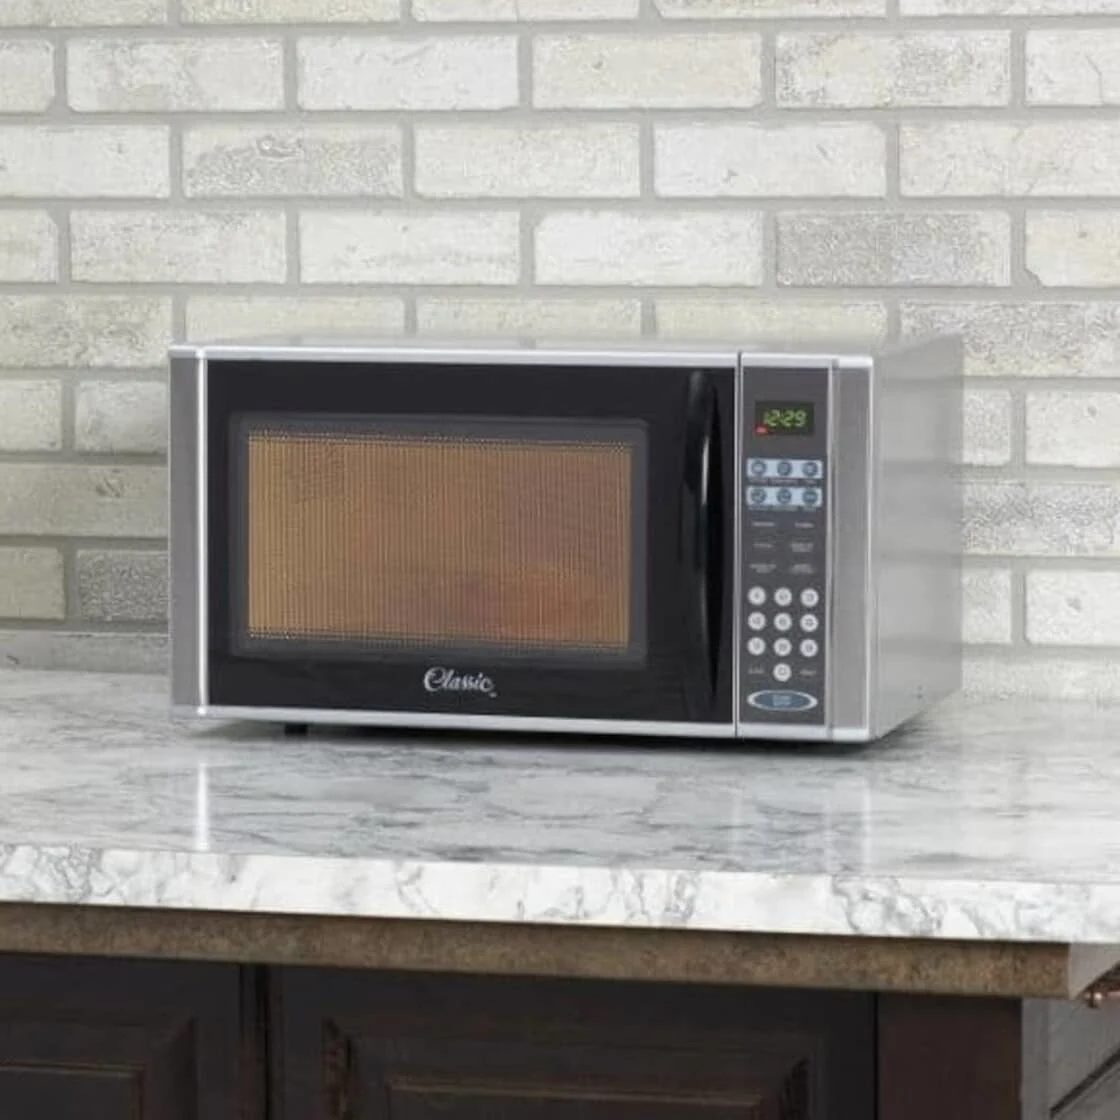 Countertop Ovens & Microwaves